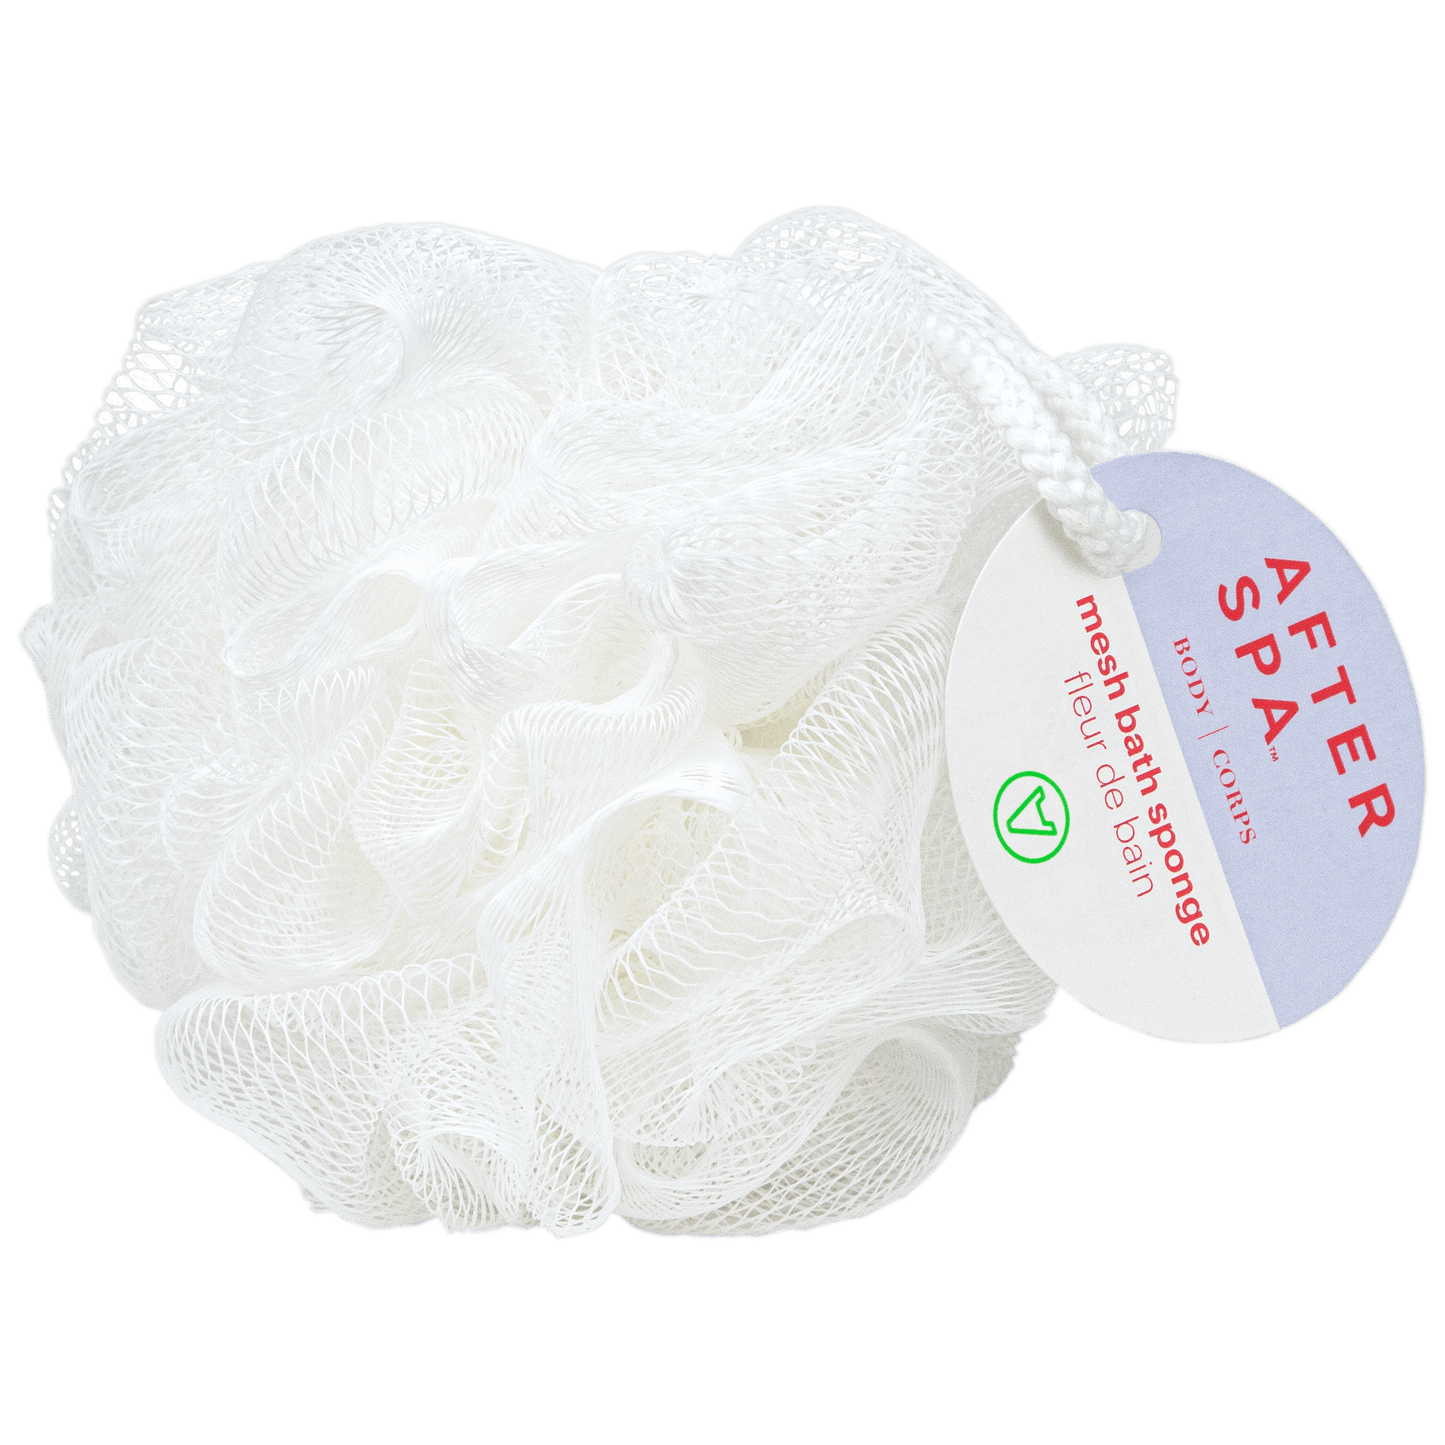 Afterspa Mesh Bath Sponge _ Body Cleanser For A Soapy, Bubbly Cleanse